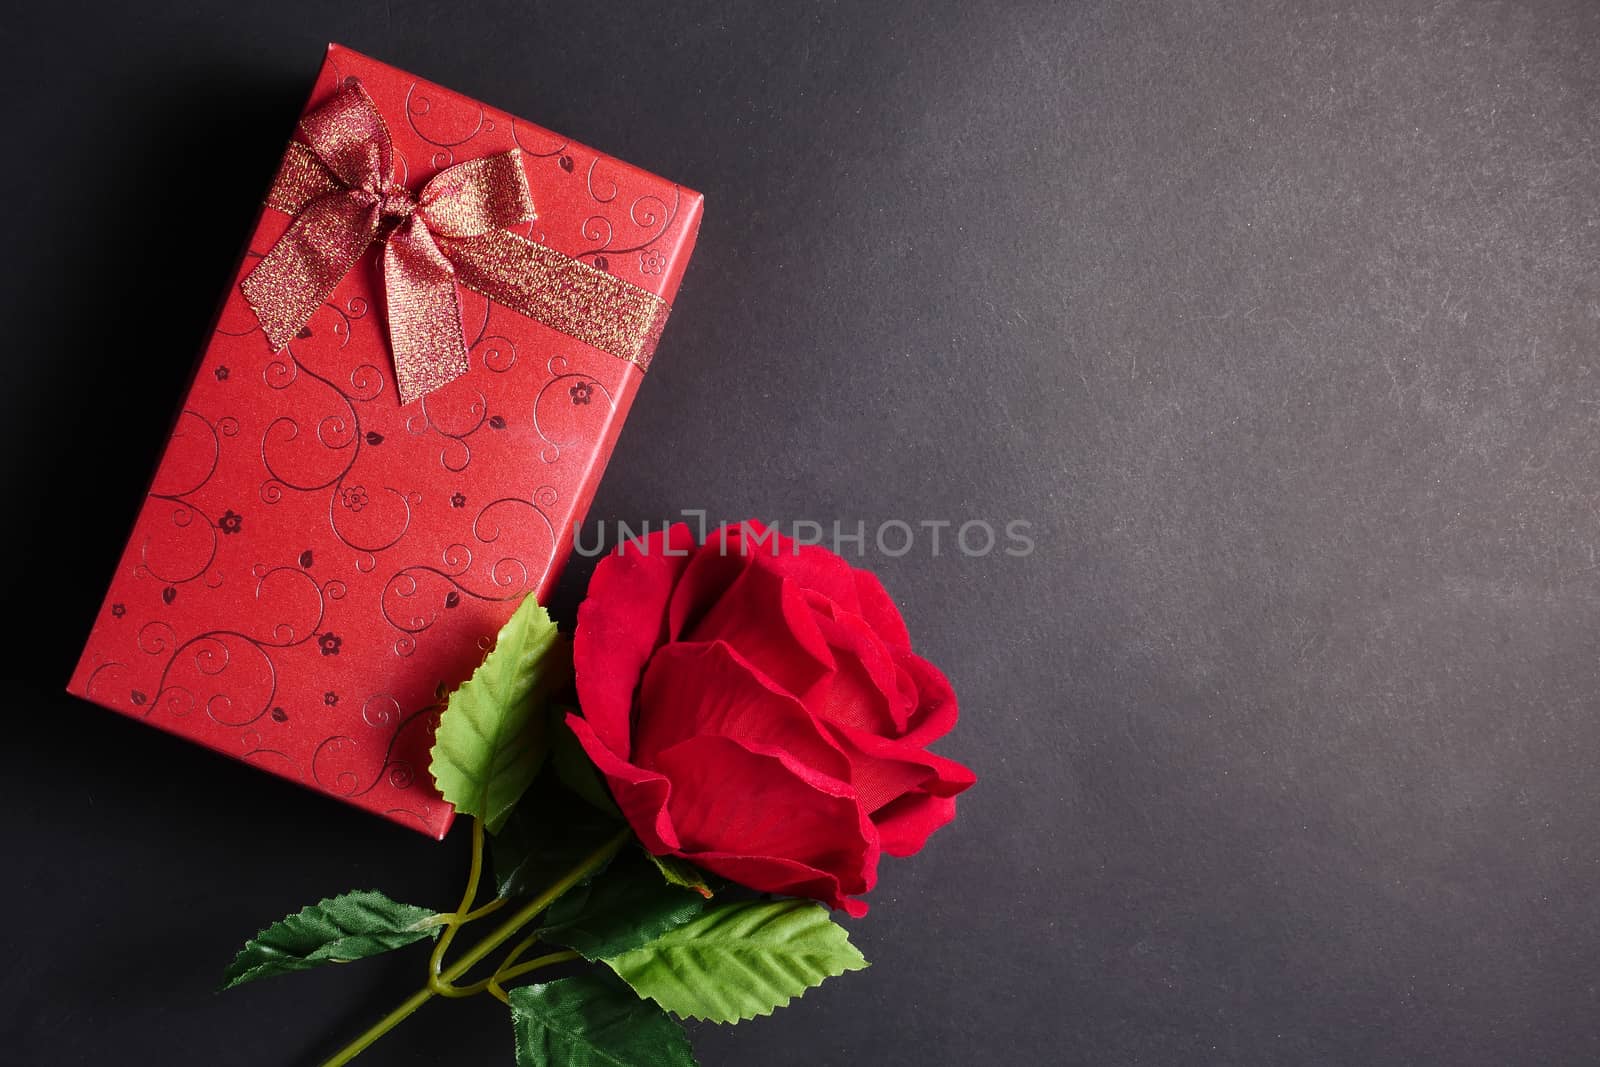 Red rose with red gift box on black background. Free space for text. Concept of Valentine Day.